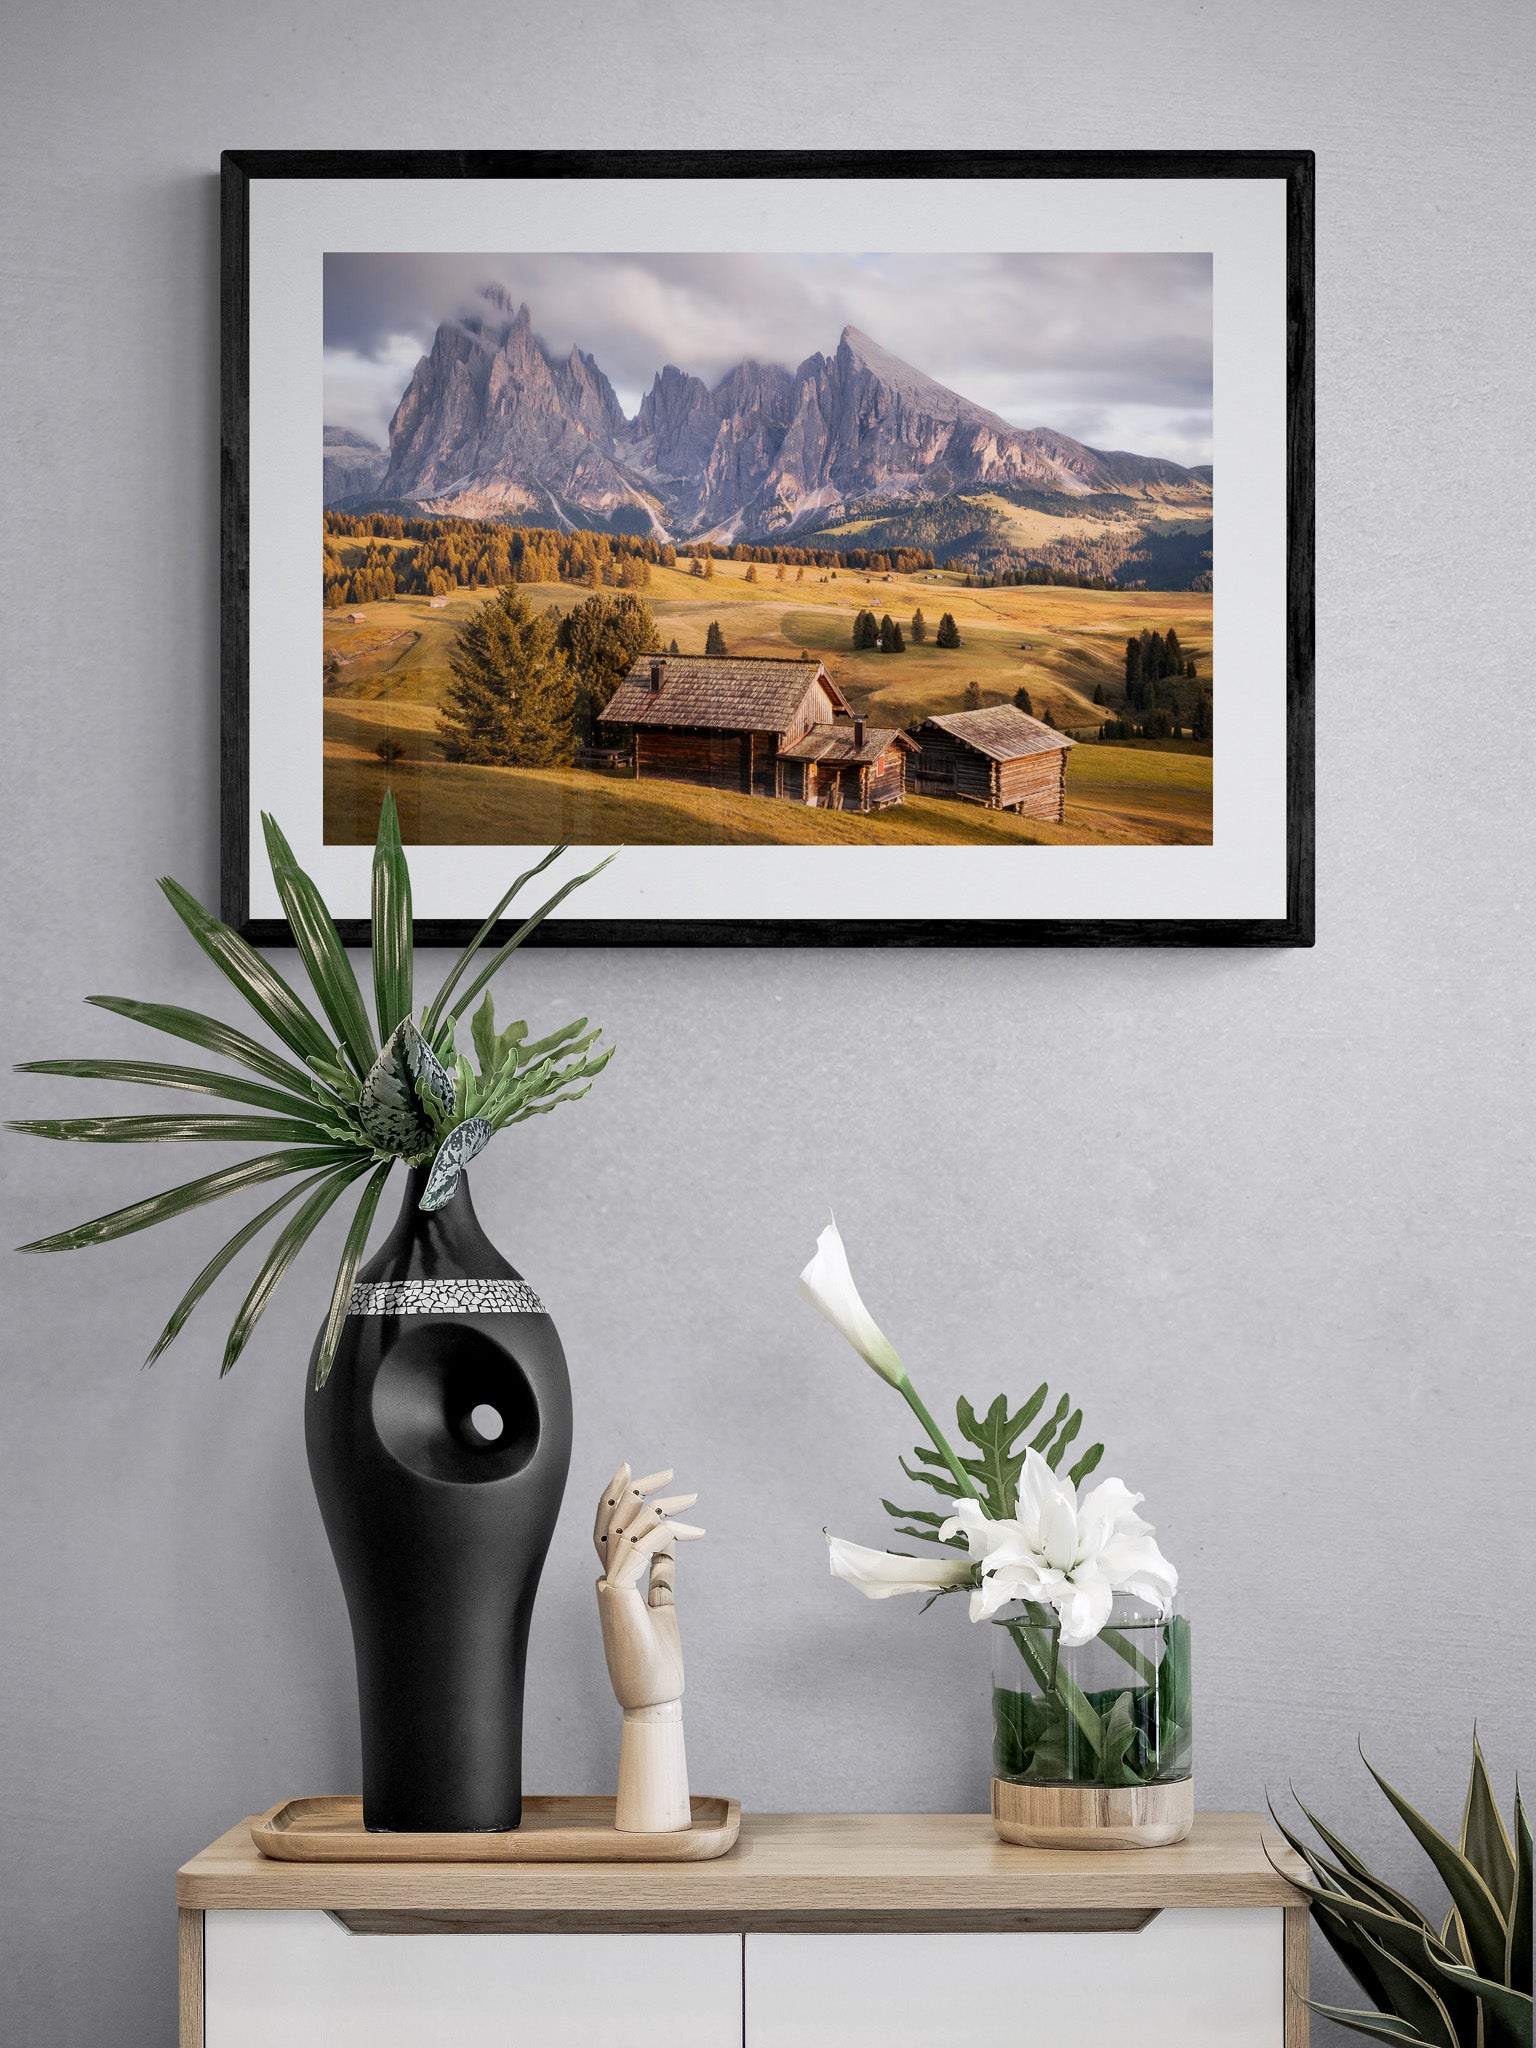 Image Title: A Tyrol Tidbit Photographer: Marcus Danz Location: Alpe di Siusi, Italy Image description: While increasingly dense clouds pass by the peaks of the mighty Sassolungo group, the pasture catches the warm light of the soon-to-set sun one more time. High quality Fine Art print up to 36 inch / around 90 centimeters on Hahnemühle paper available. Medium variant over sideboard.